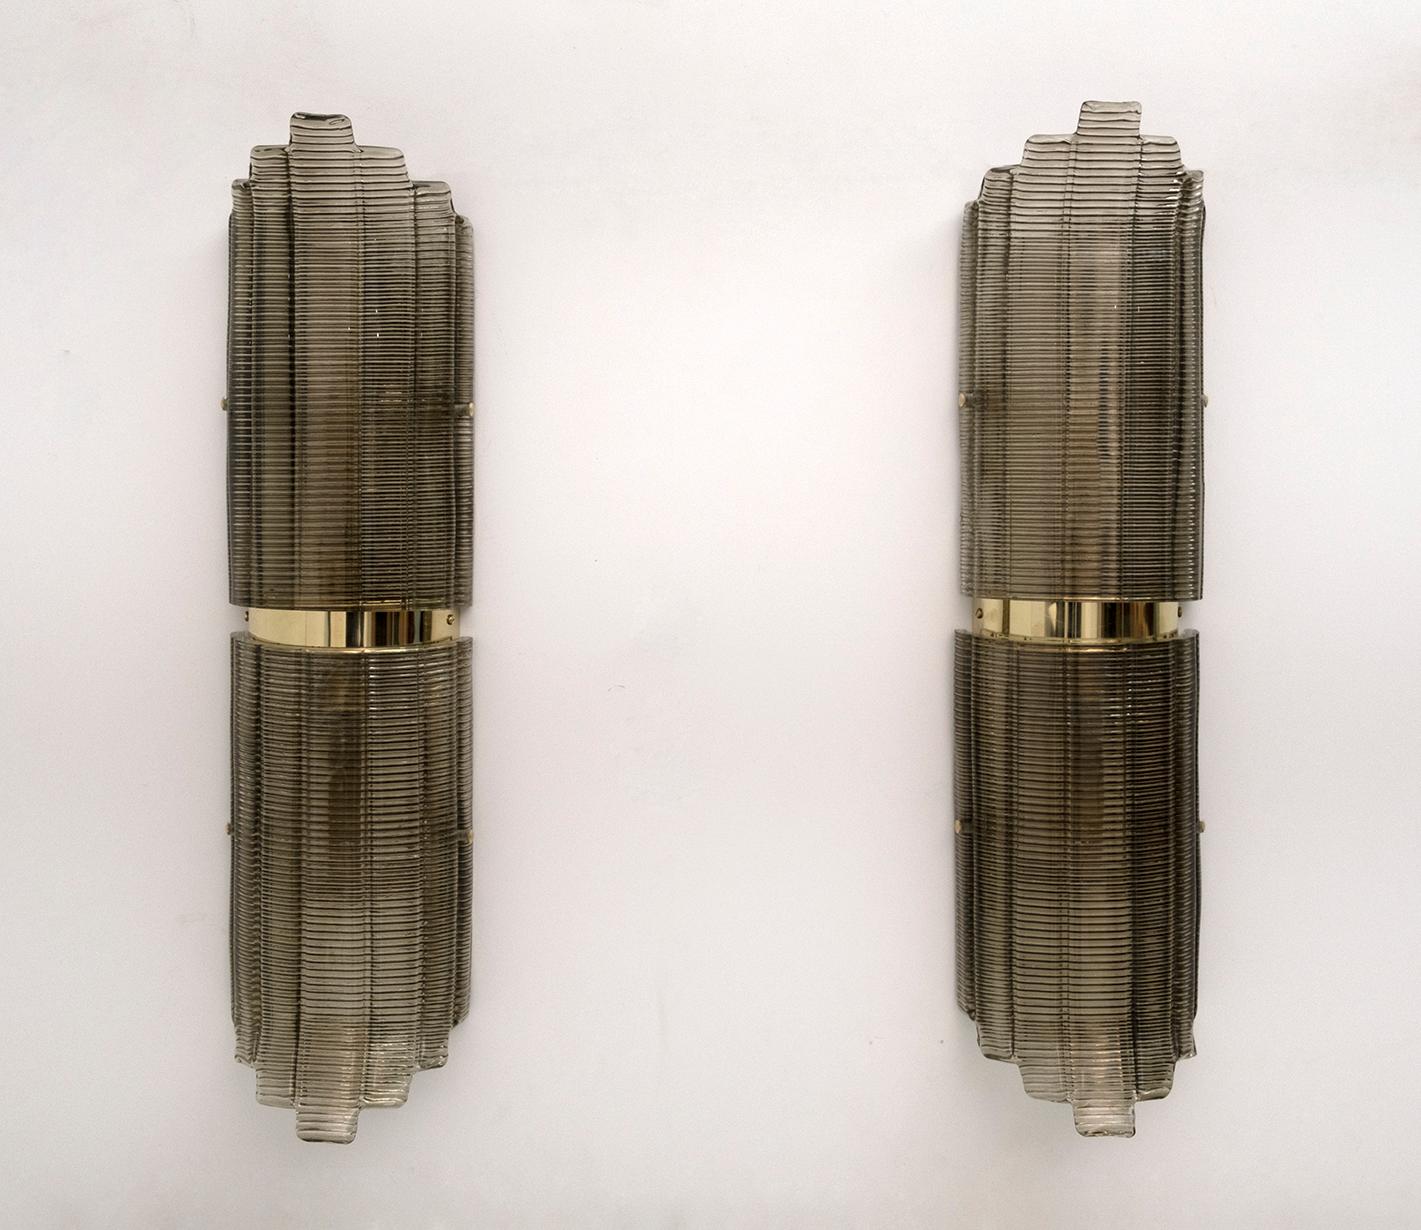 Pair of smoke-colored Murano glass wall lamps in structured glass and brass. The glass is textured with ribs and is curved in design, creating a superb decorative impact. Each wall light requires a medium base bulb and is wired to match US standards.